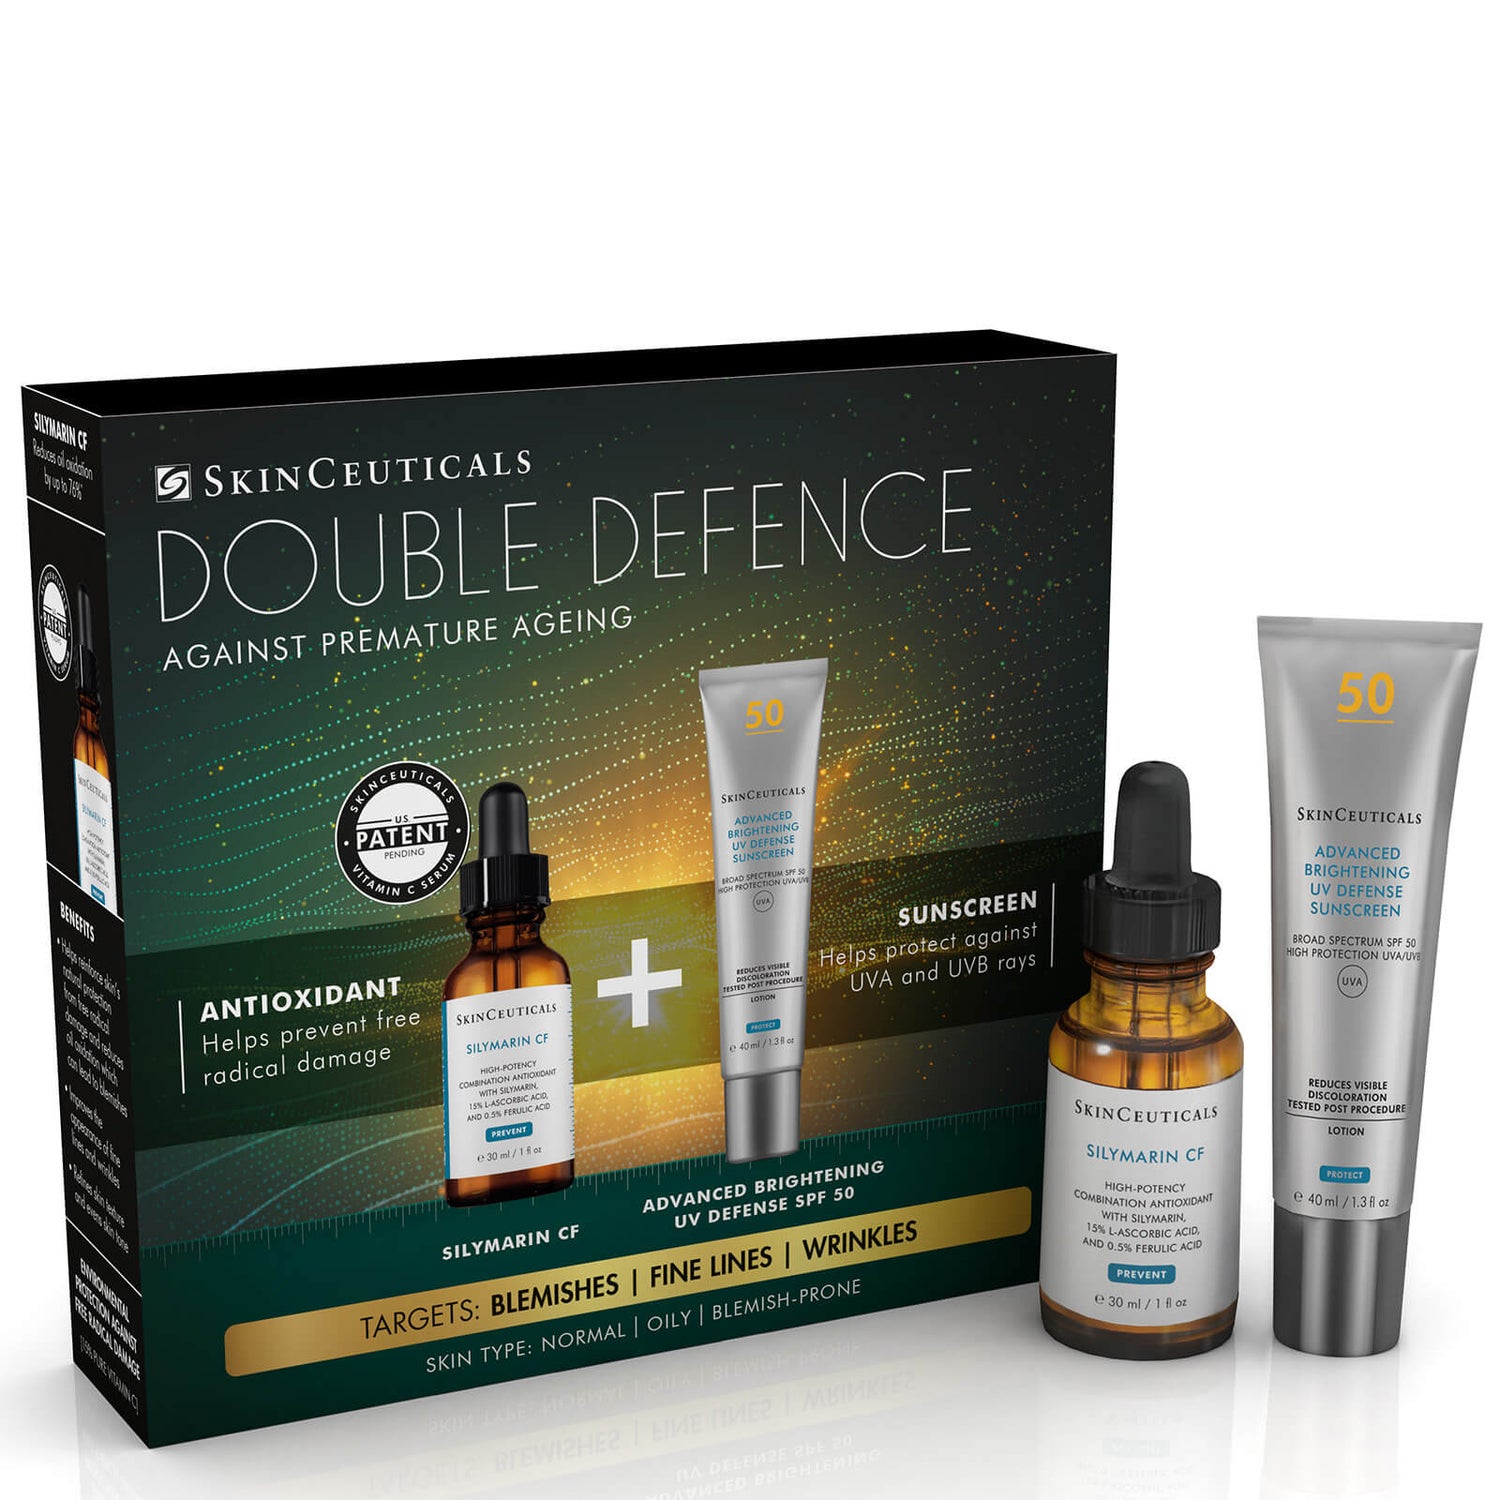 SkinCeuticals Double Defence Silymarin CF Kit for Oily, Blemish-Prone Skin (Worth £190.00)